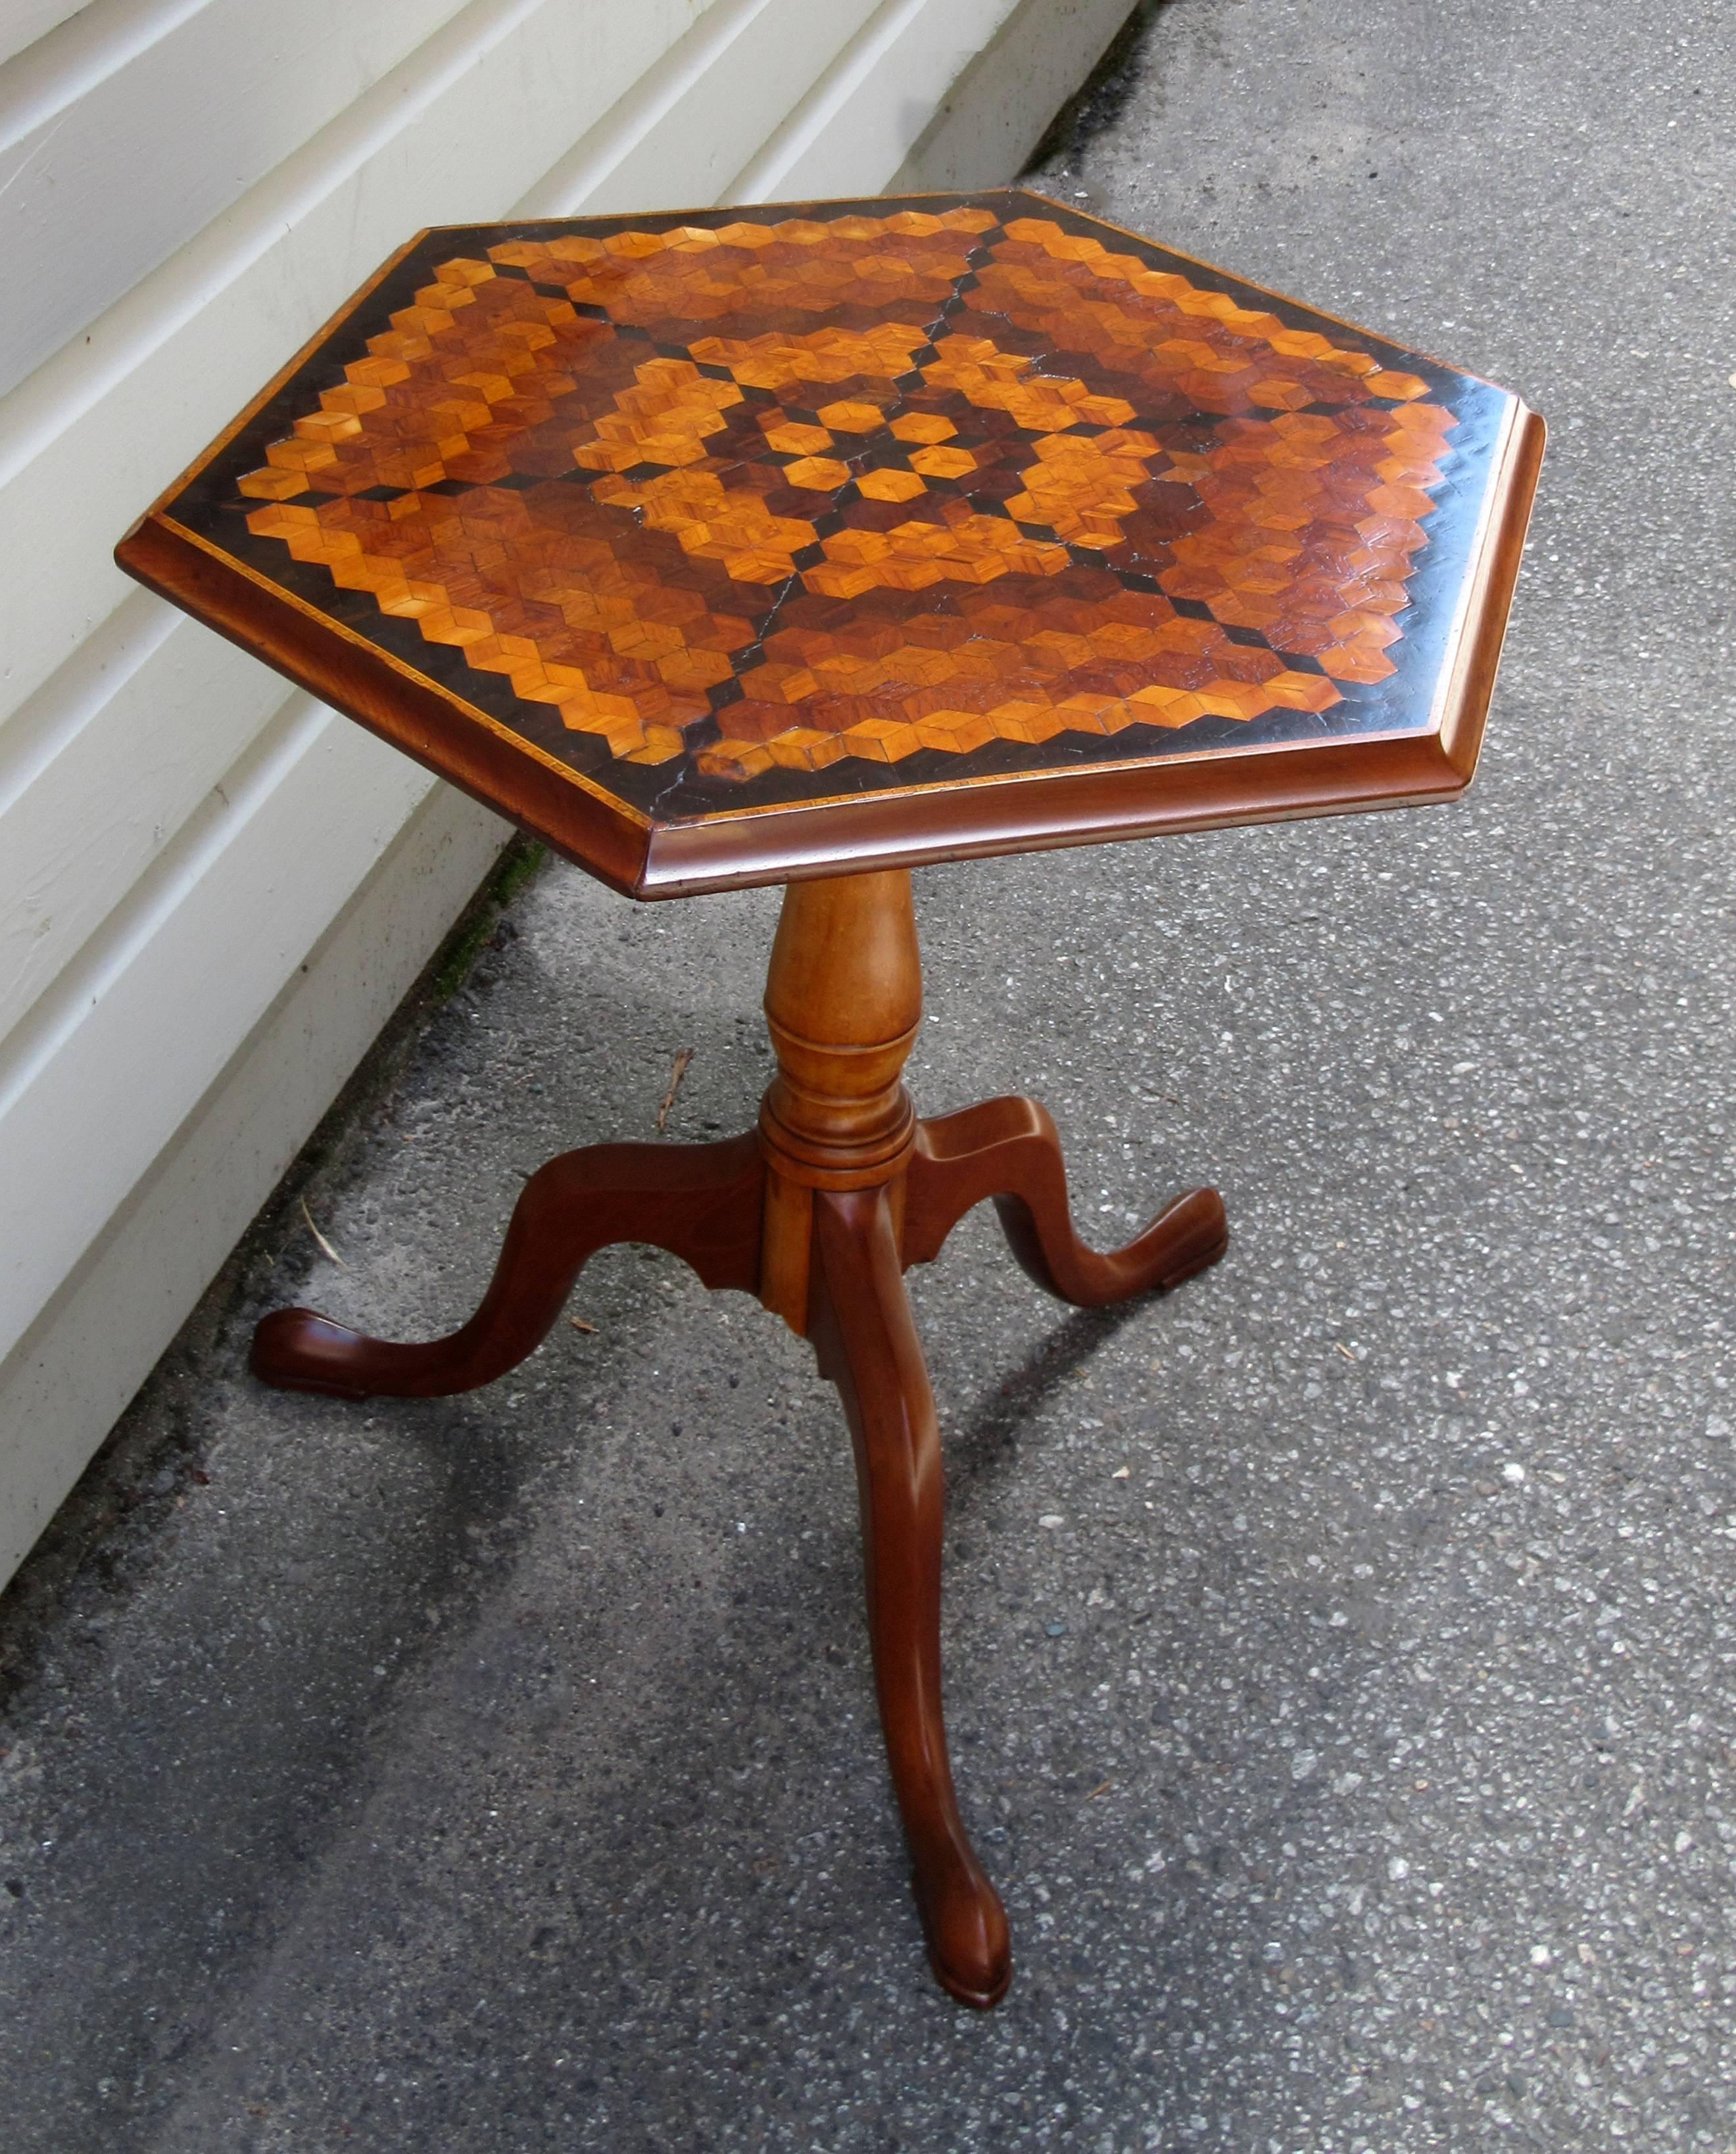 A late 18th century English neoclassical maple tilt-top table, circa 1780, with hexagonal specimen top on tripod cabriole pedestal base with each leg ending in a pad foot.